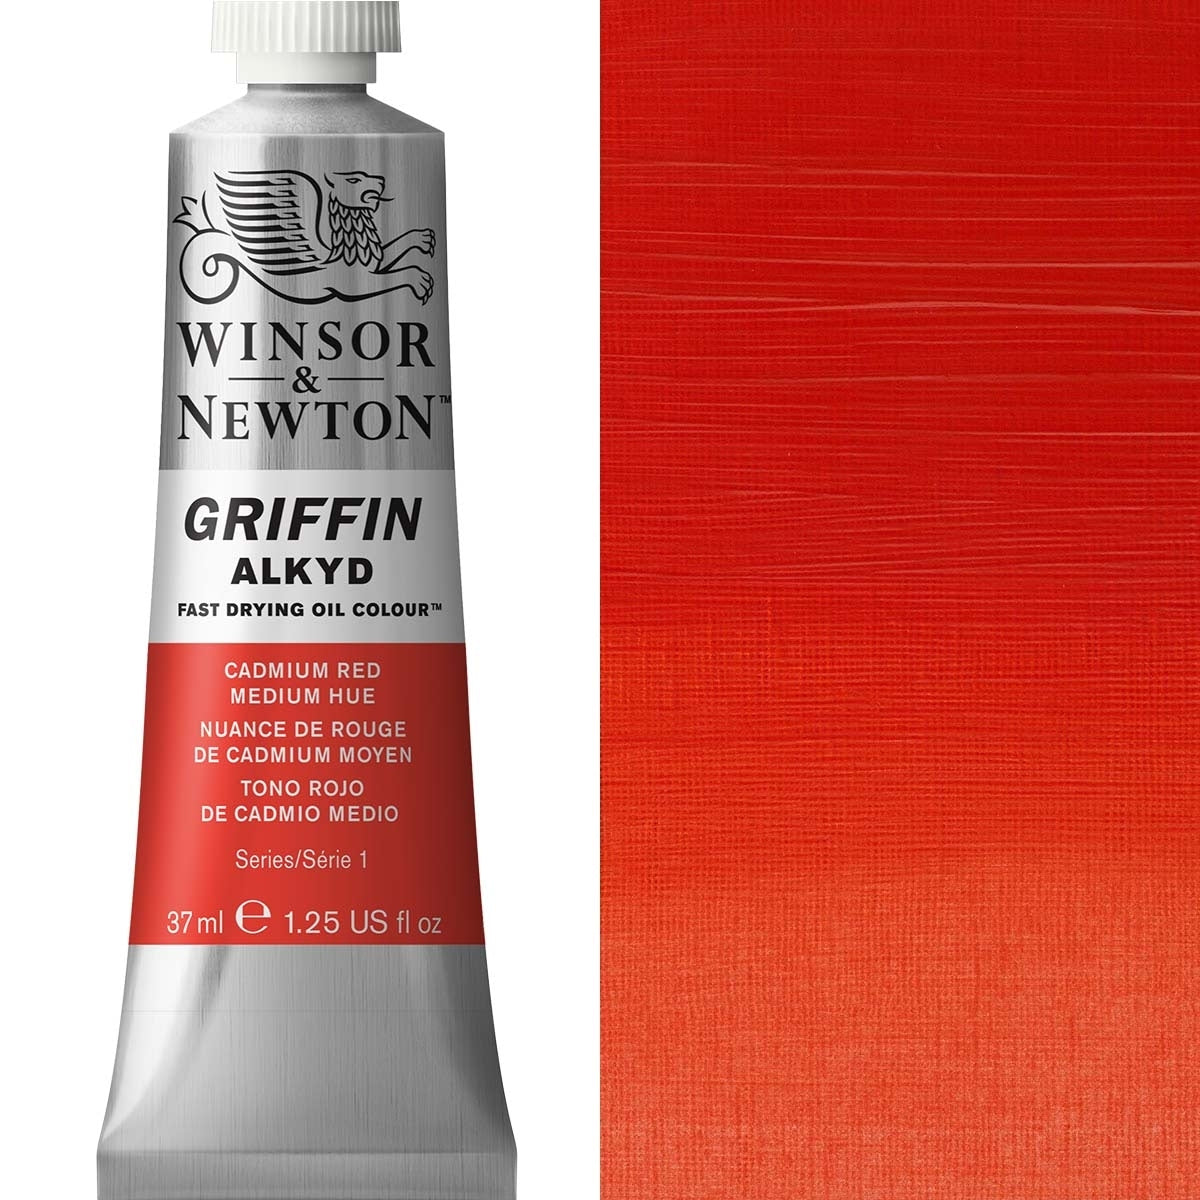 Winsor and Newton - Griffin ALKYD Oil Colour - 37ml - Cadmium Red Medium Hue